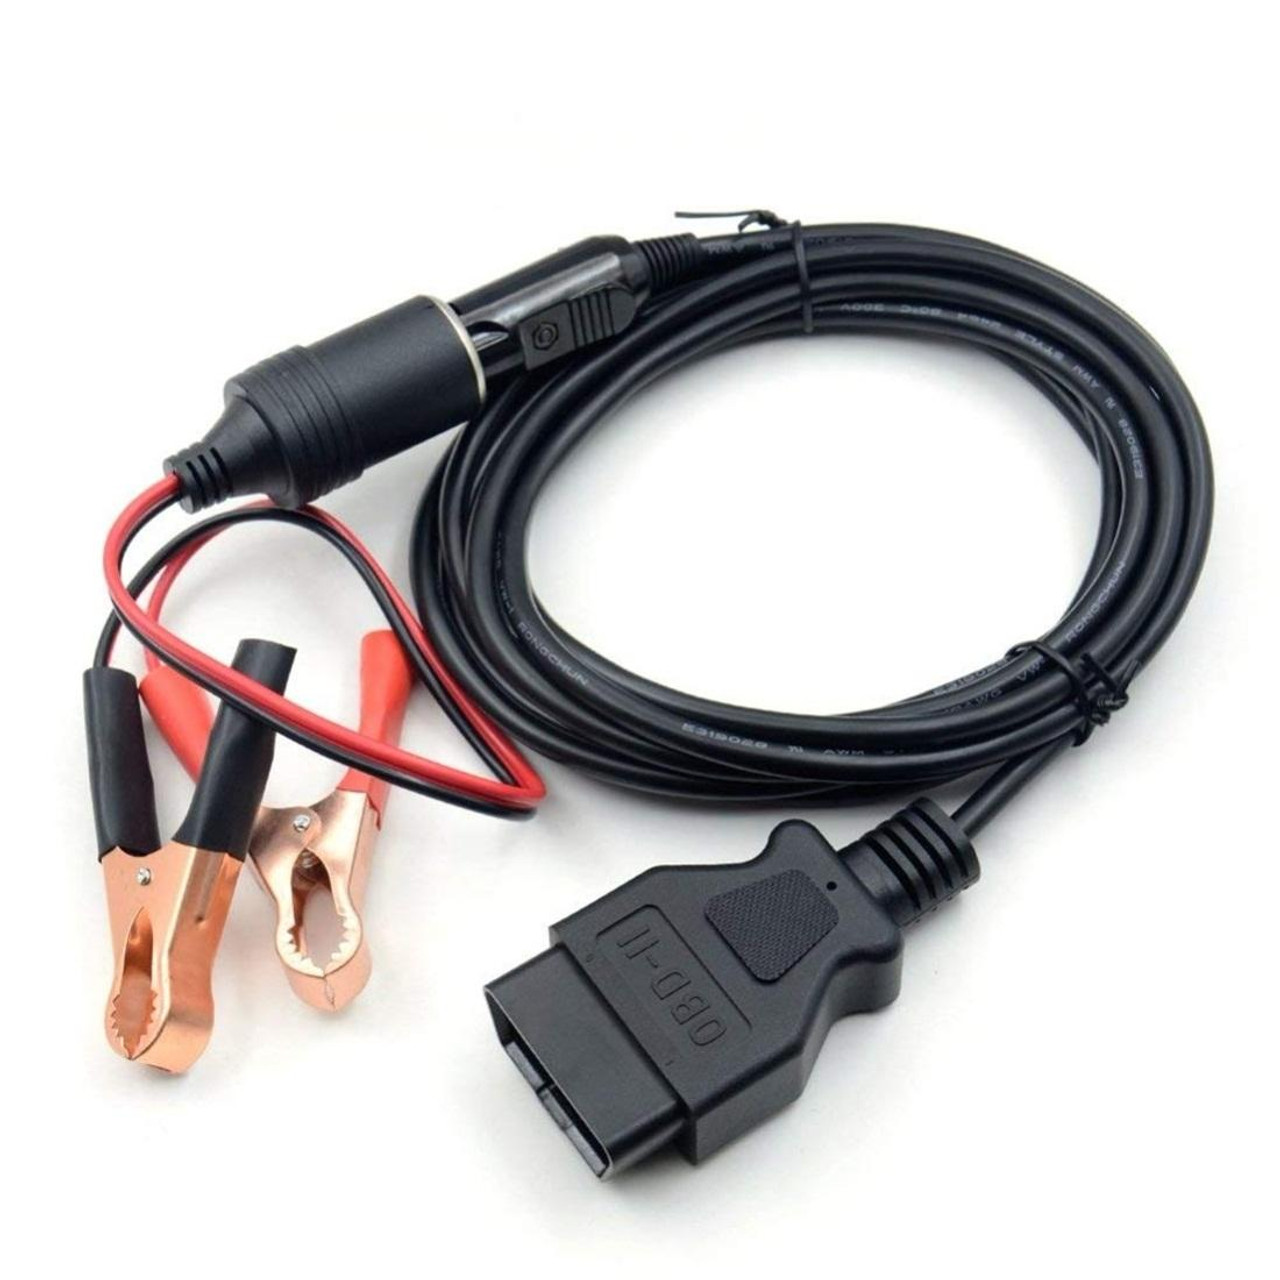 OBD II Car ECU Emergency Power Supply Cable Memory Saver with